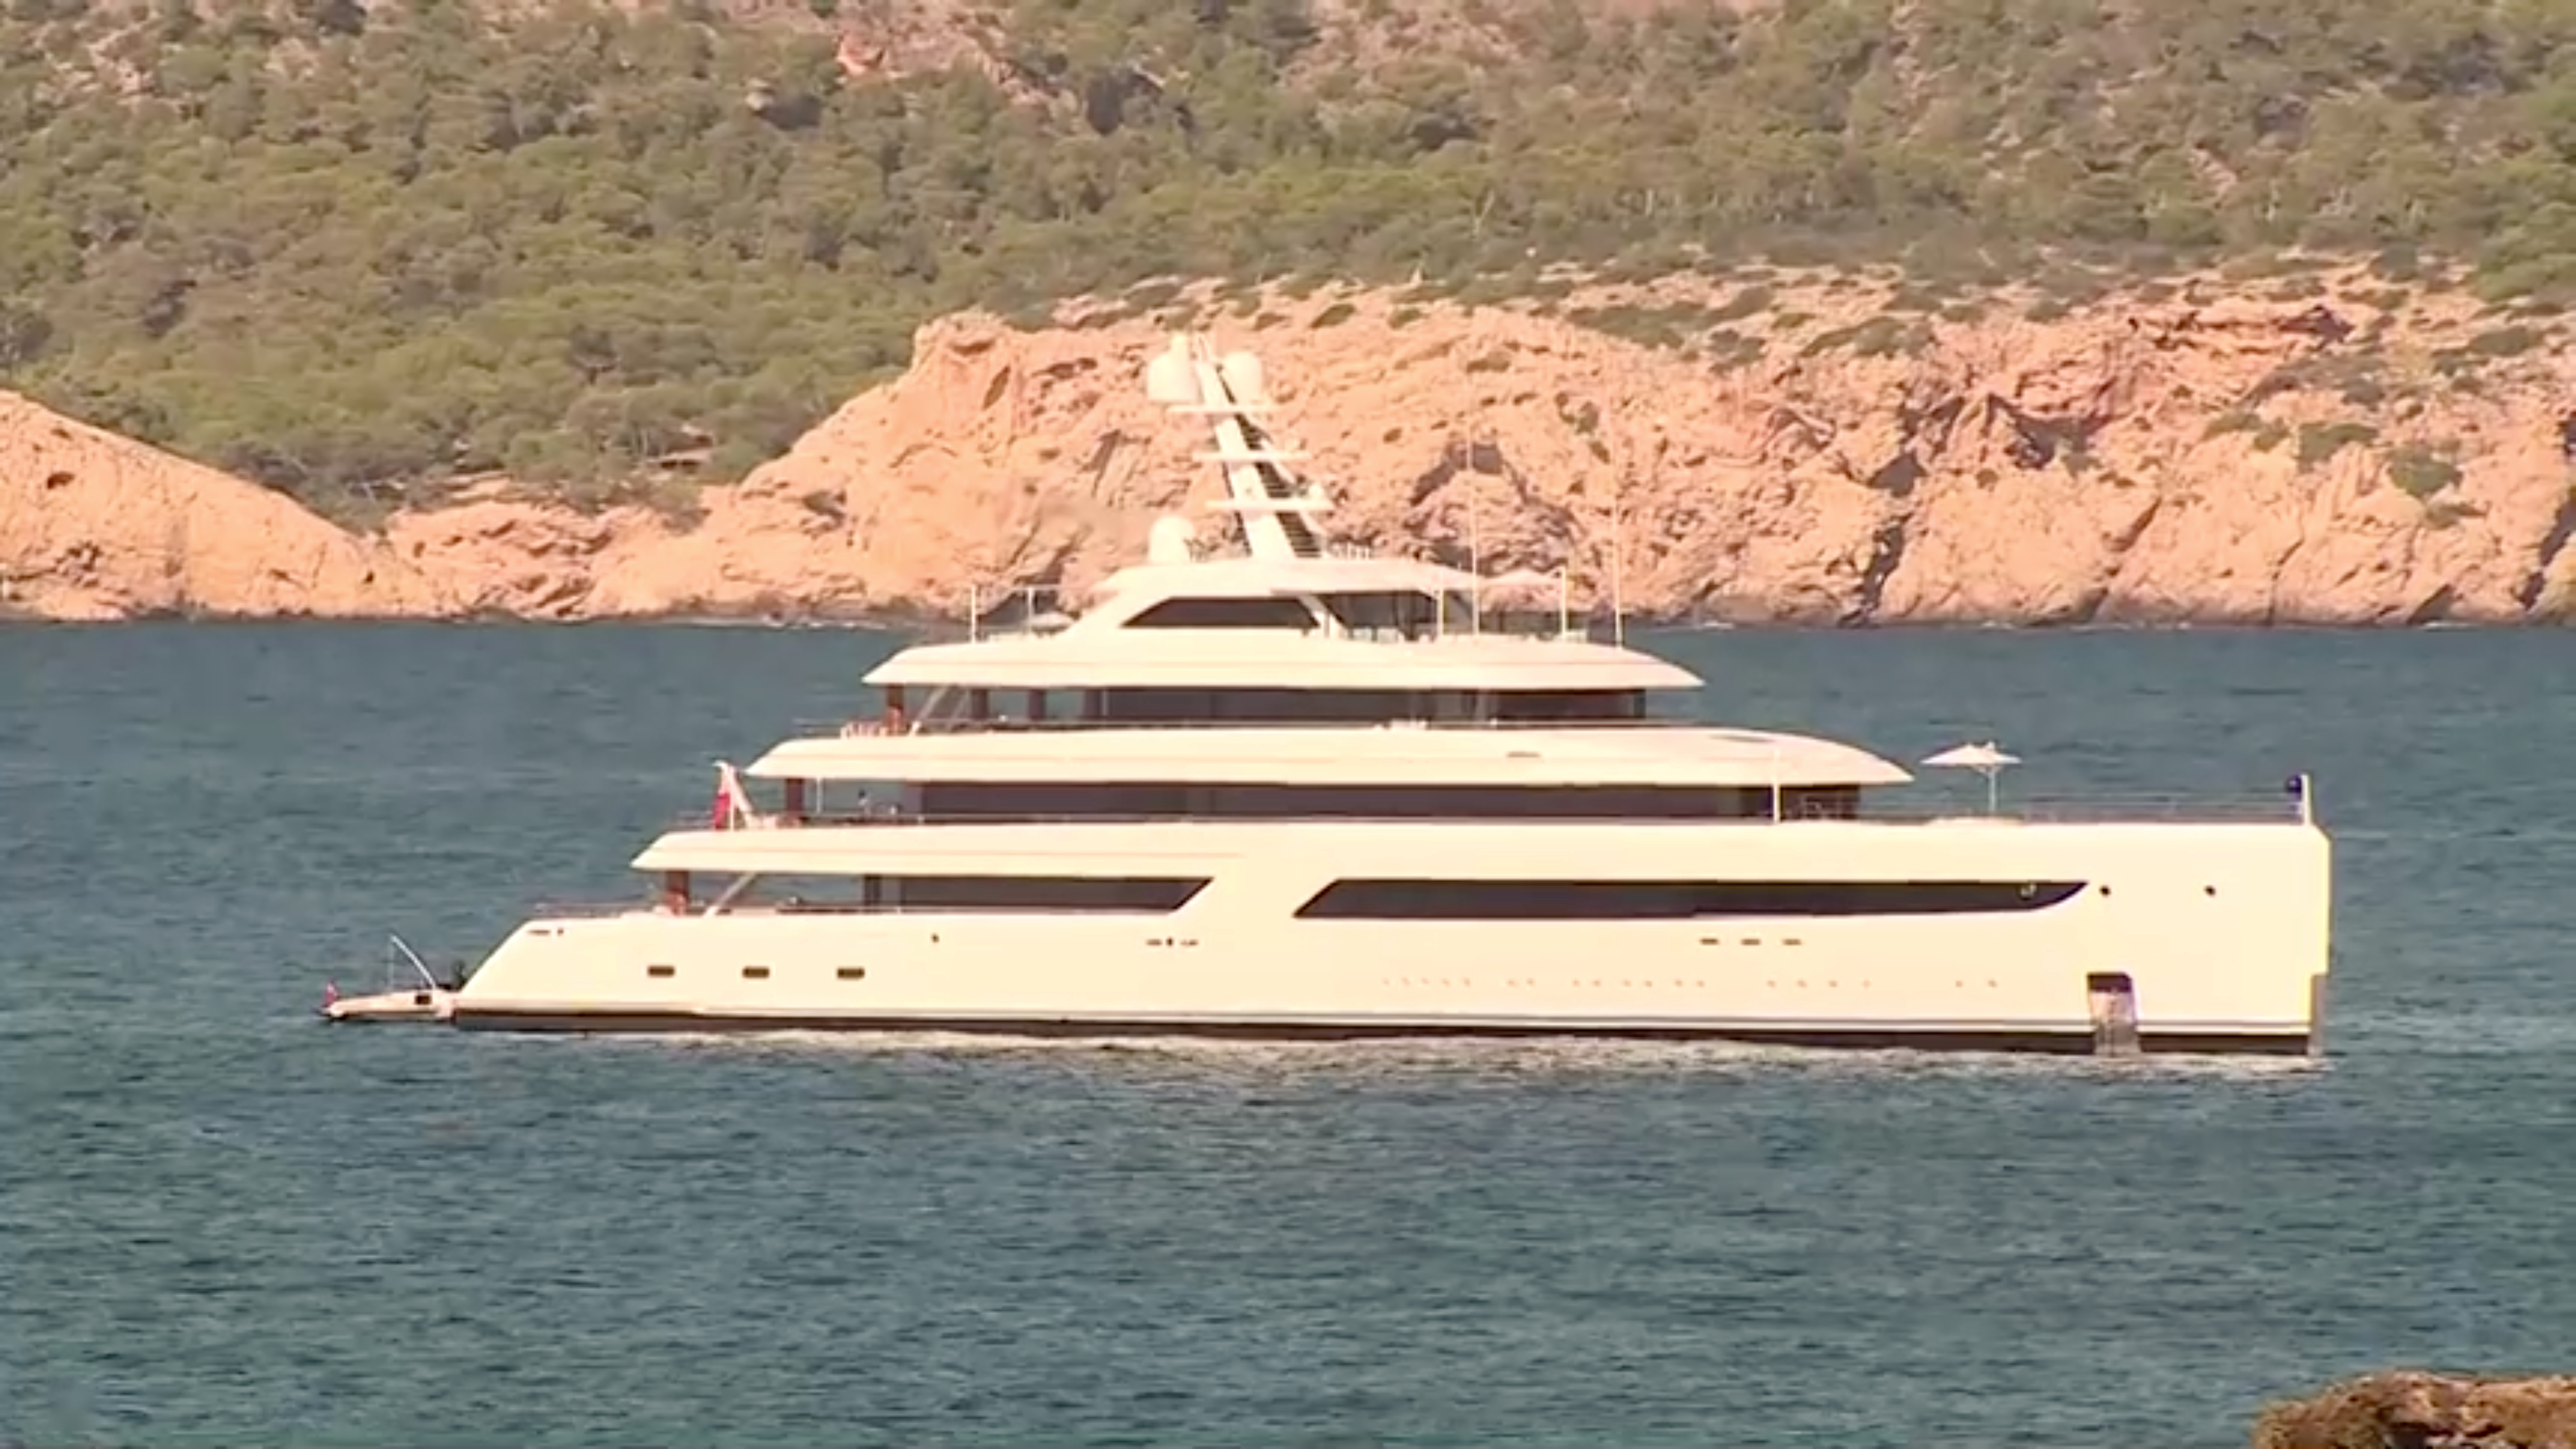 Alibaba Group founder's, Jack Ma, superyacht Zen is anchored by Mallorca Island coast, Spain October 20, 2021 in this still image taken from video. REUTERS TV via REUTERS